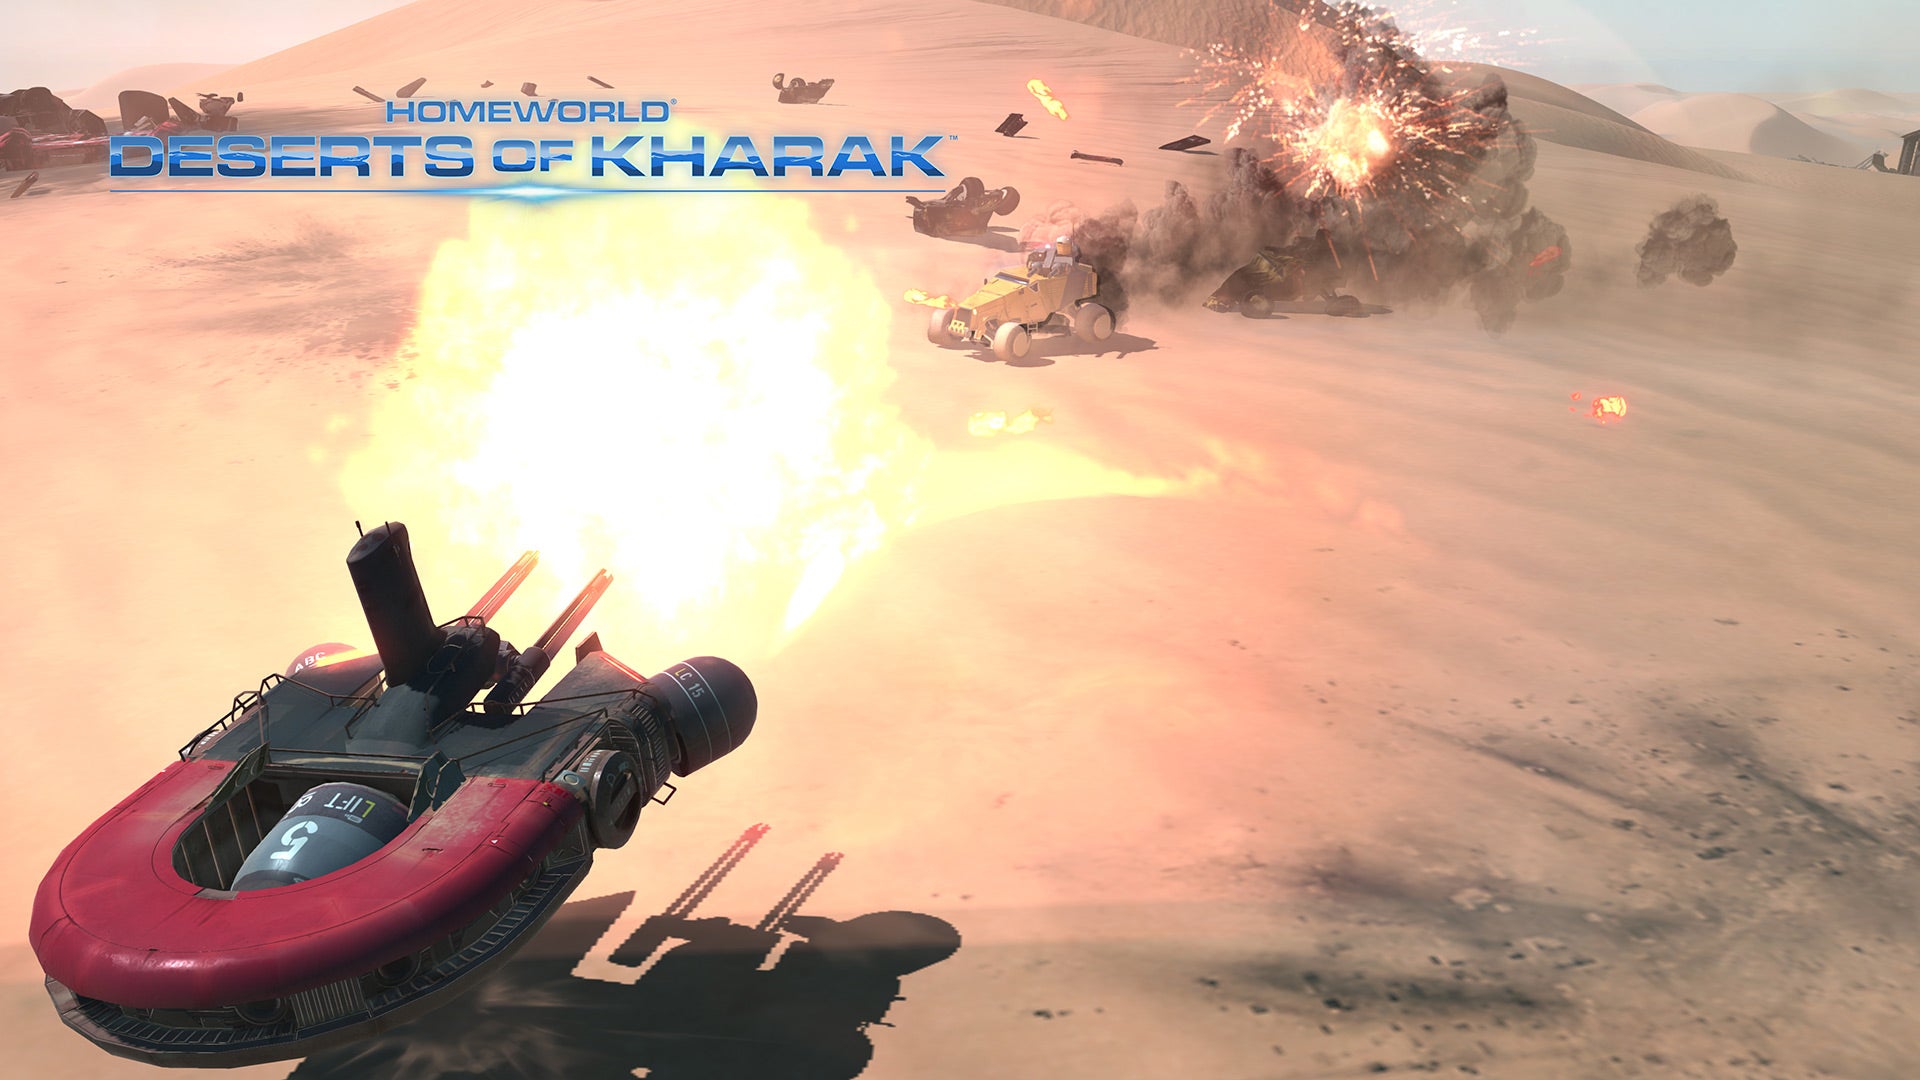 Image for Homeworld: Deserts of Kharak announced with a January 2016 release date